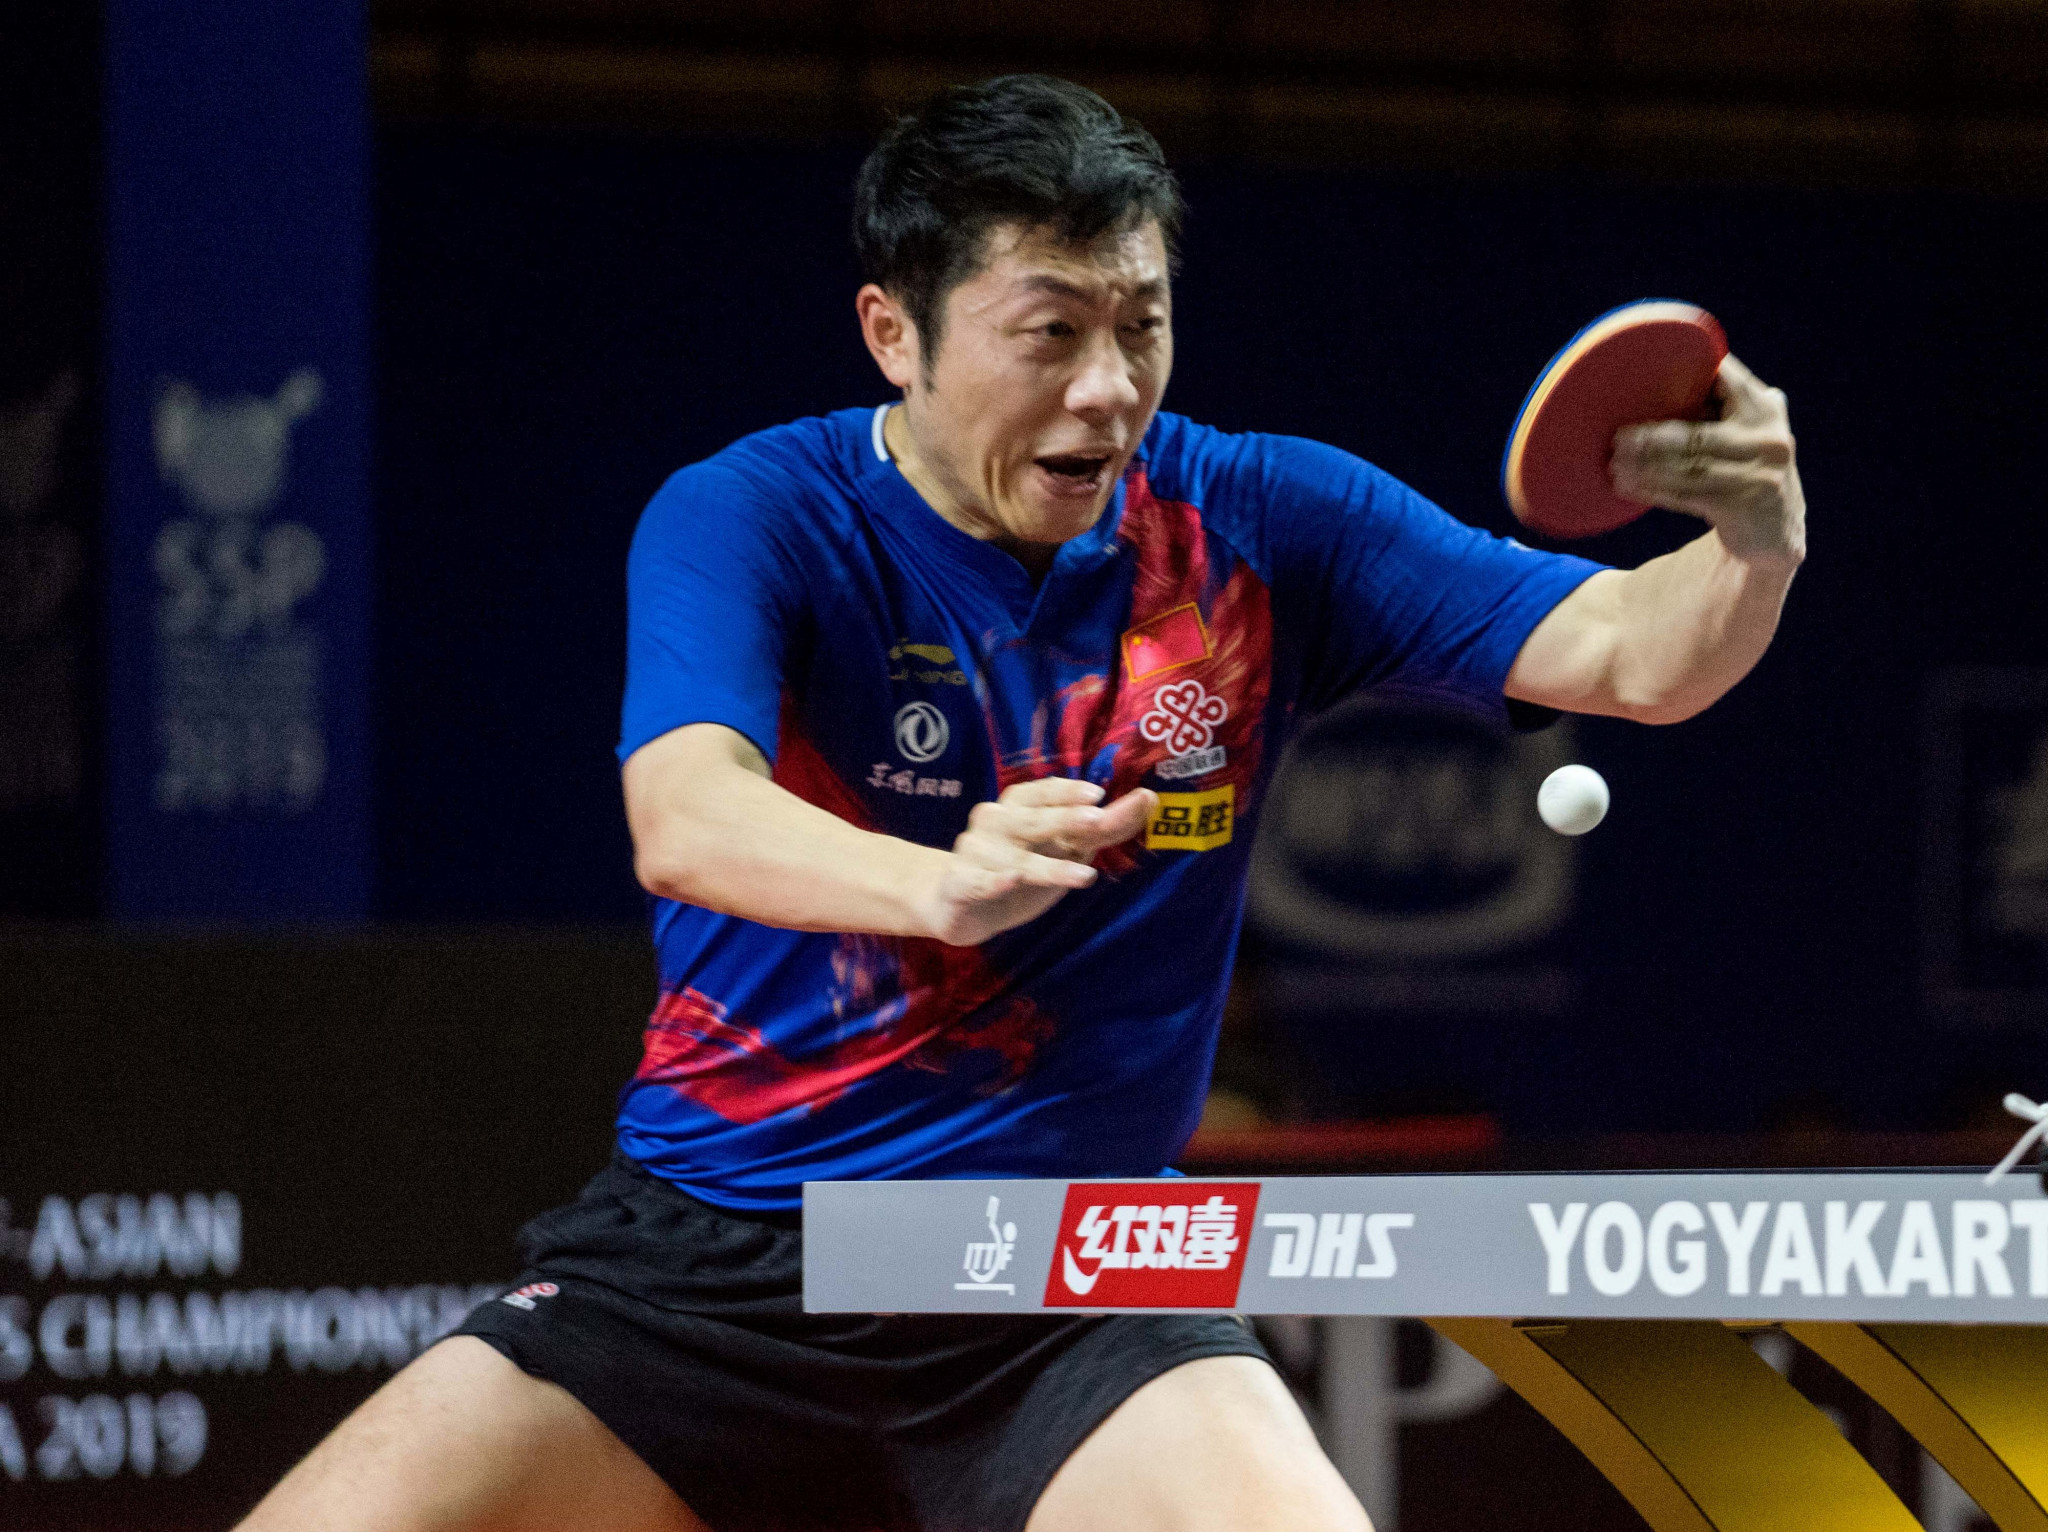 Xu clinches men's singles title at Asian Table Tennis Championships